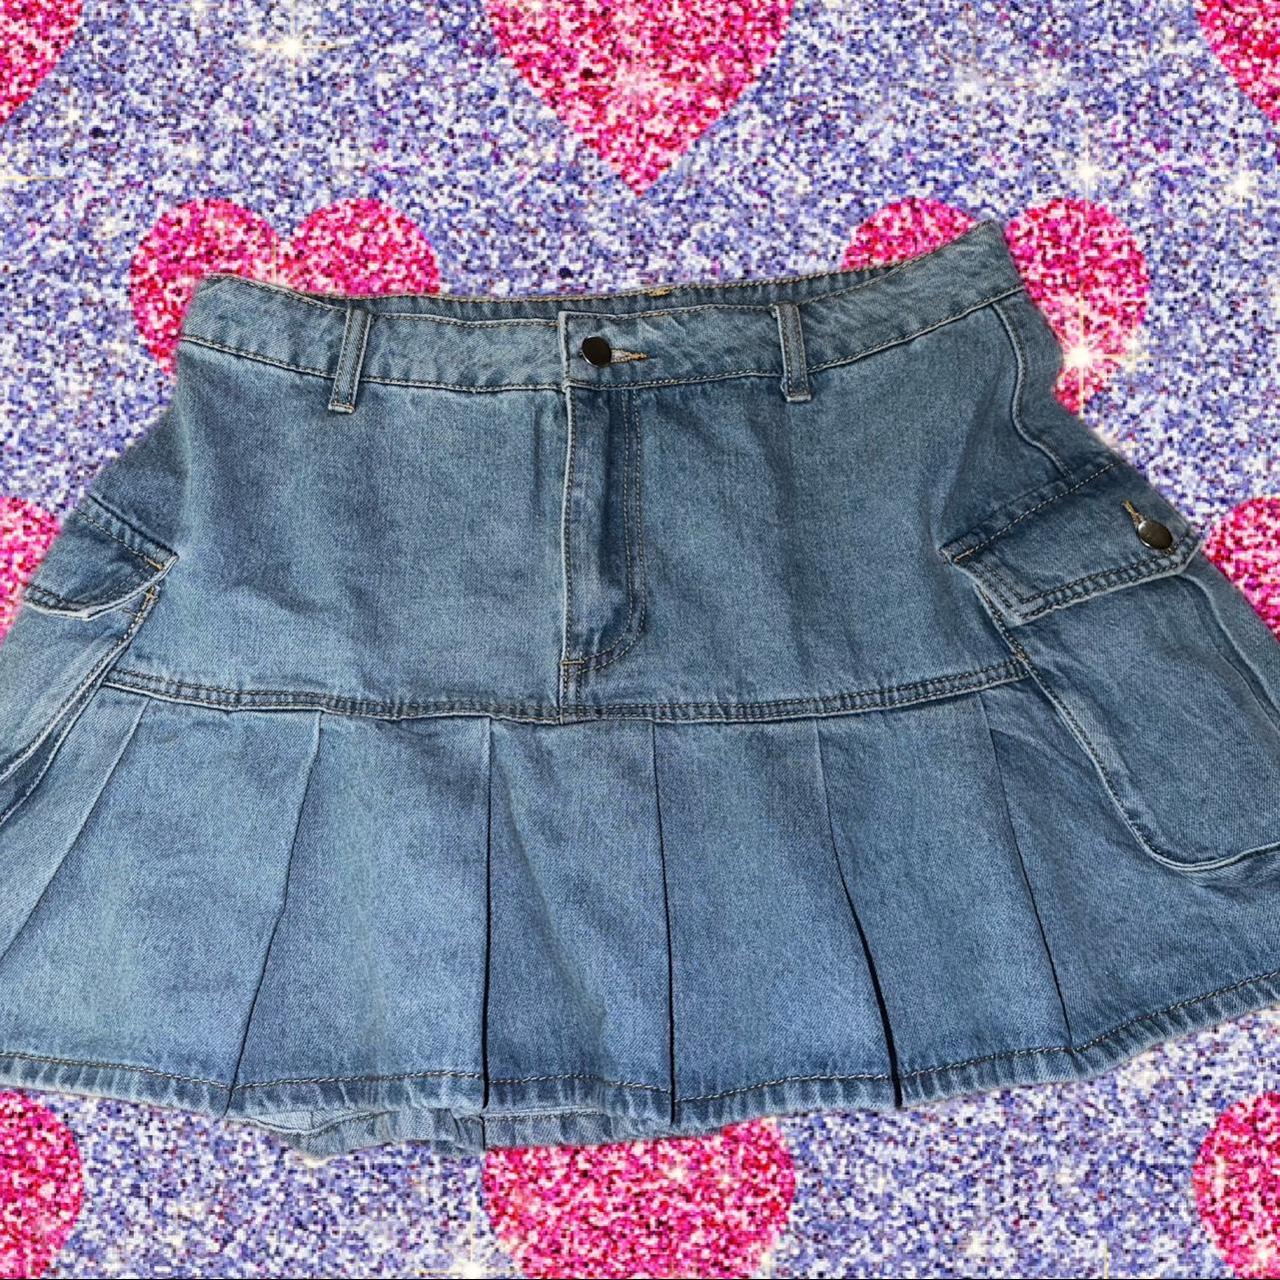 Adorable denim pleated skirt with pockets on the side 🩵 - Depop